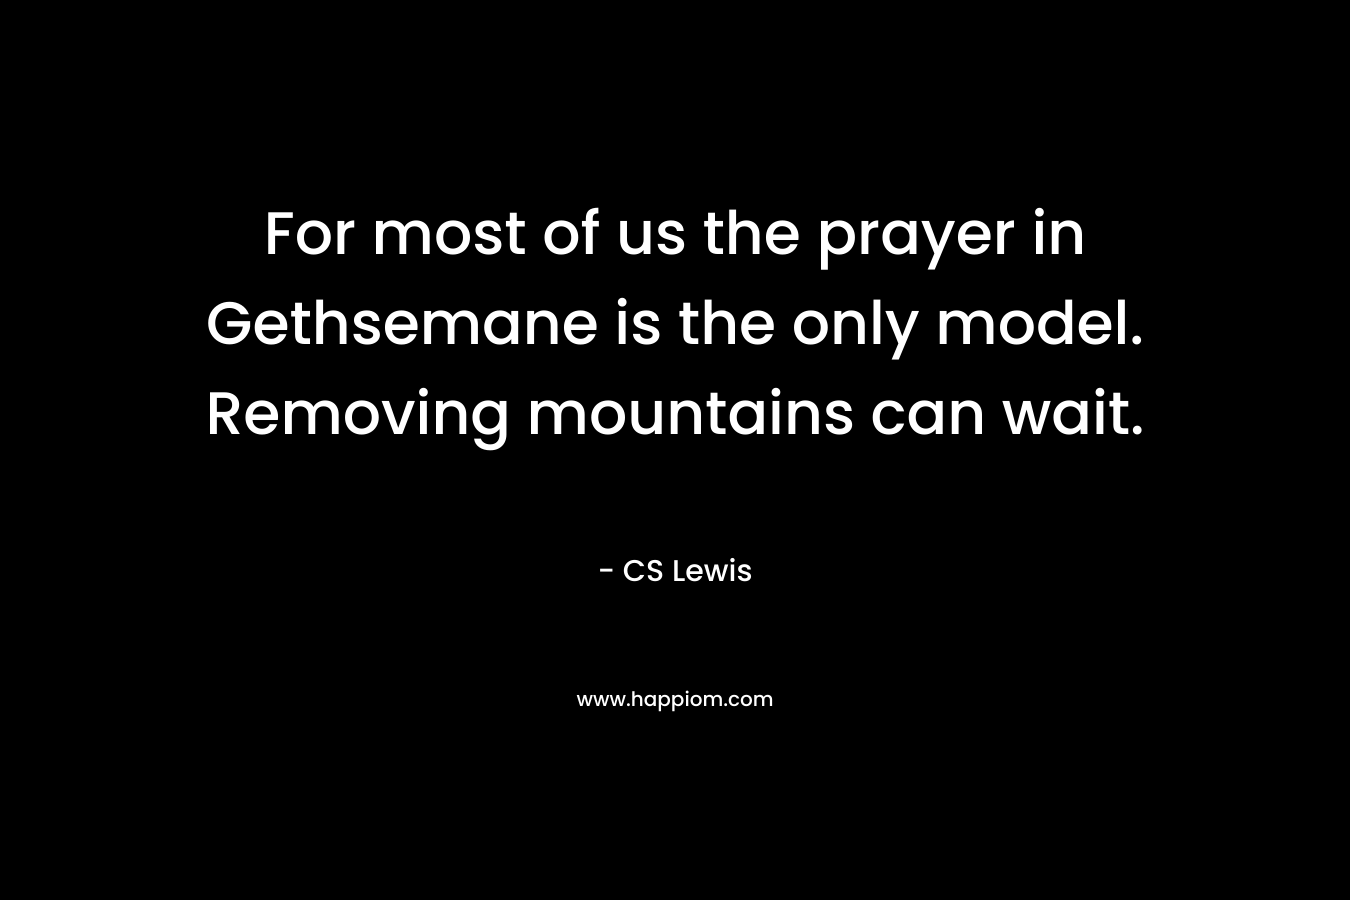 For most of us the prayer in Gethsemane is the only model. Removing mountains can wait. – CS Lewis